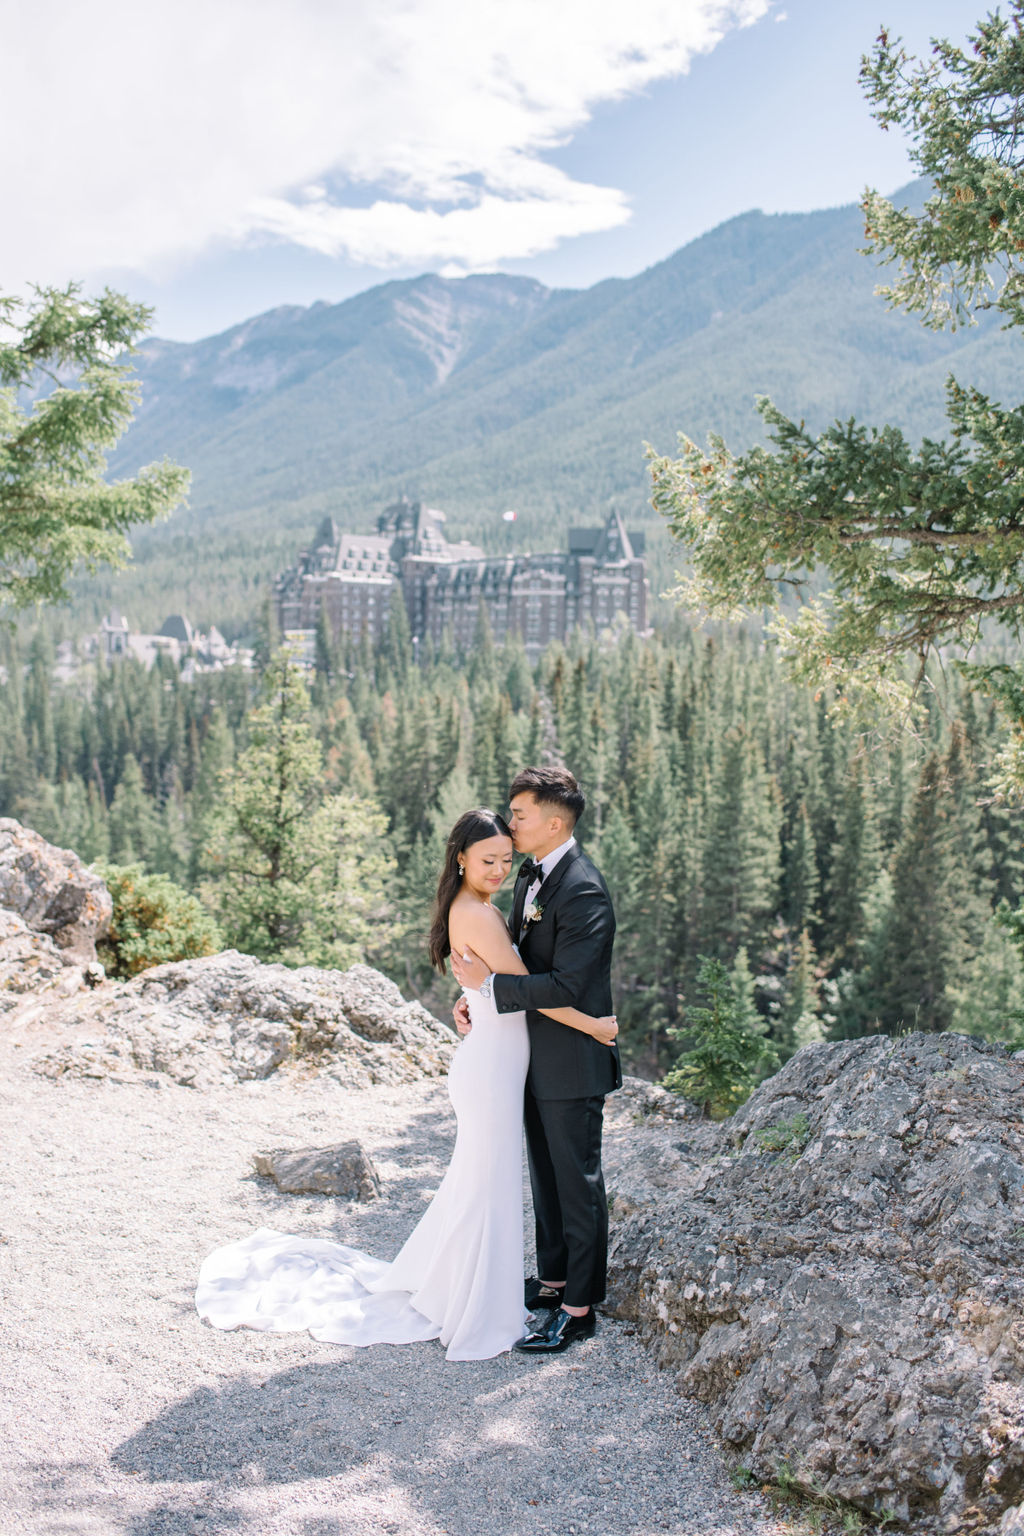 Elegant bride and groom embracing in the mountains with Fairmont Banff Springs Golf and Country Club in the background.  Canadian summer mountain wedding inspiration.